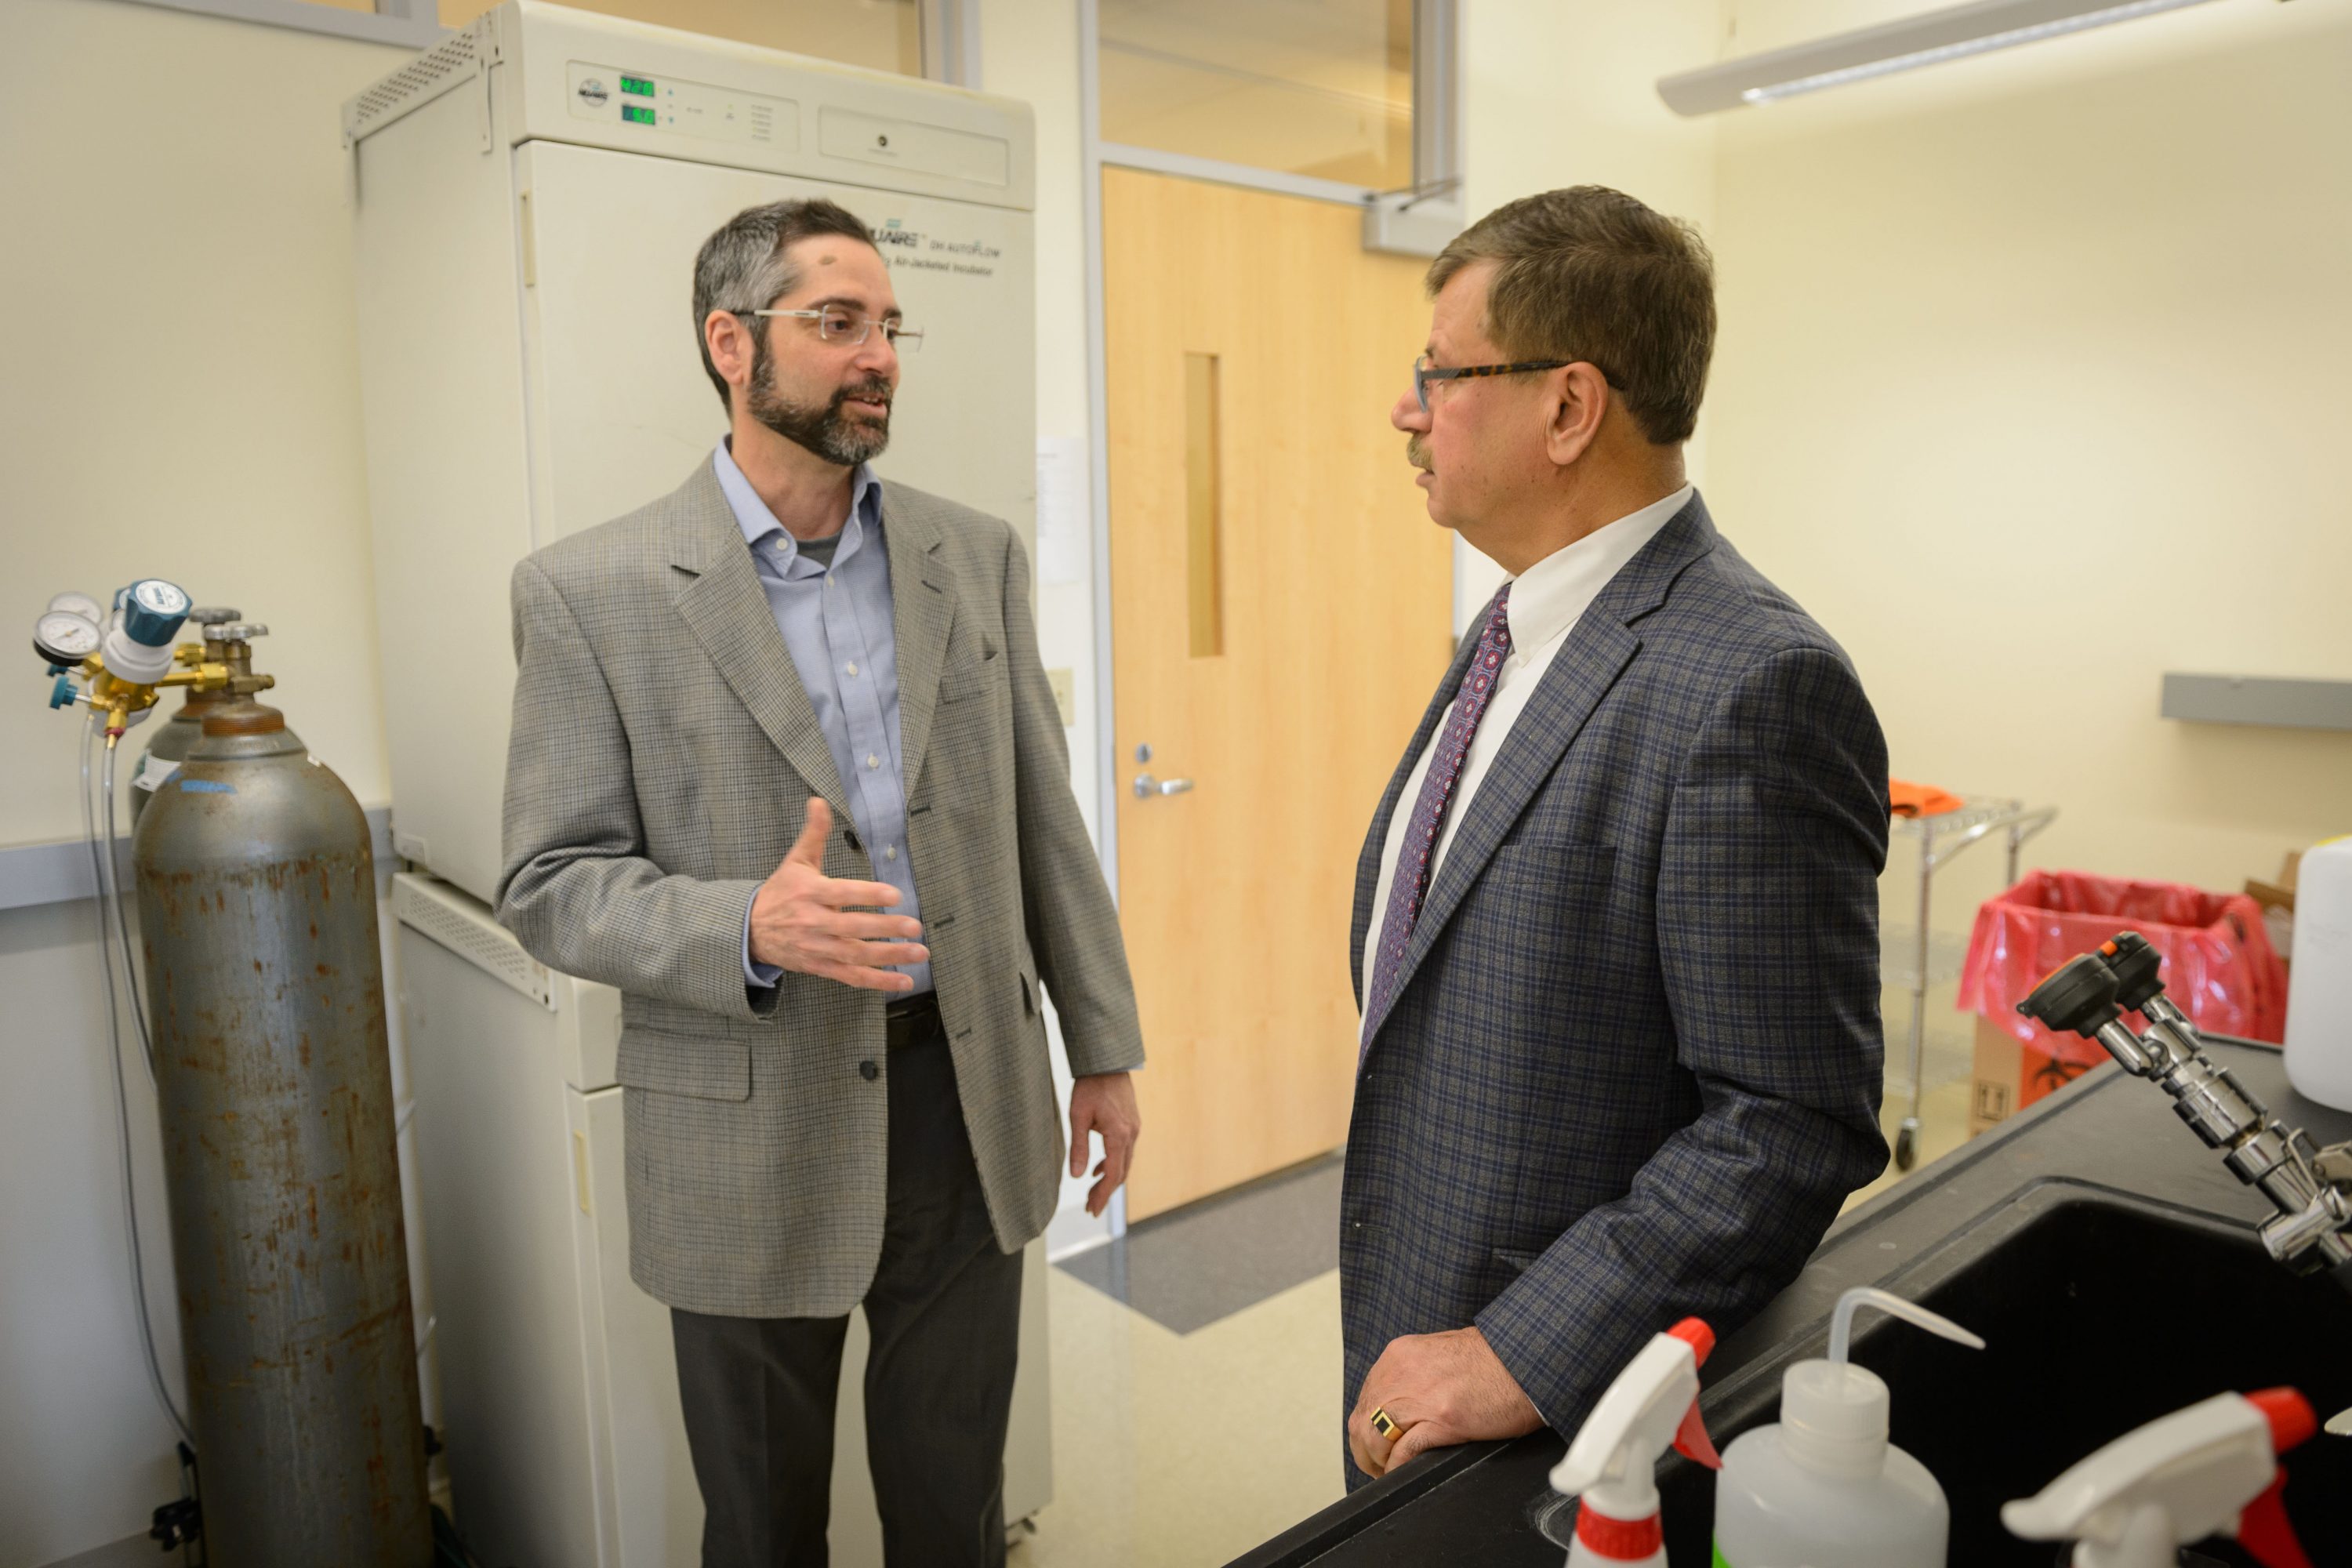 Anthony T. Vella, professor and Boehringer Ingelheim chair in immunology, left, speaks with President and CEO, Bijan Almassian at CaroGen Corp.'s technology incubation lab in Farmington on Dec. 12, 2016. (Peter Morenus/UConn Photo)